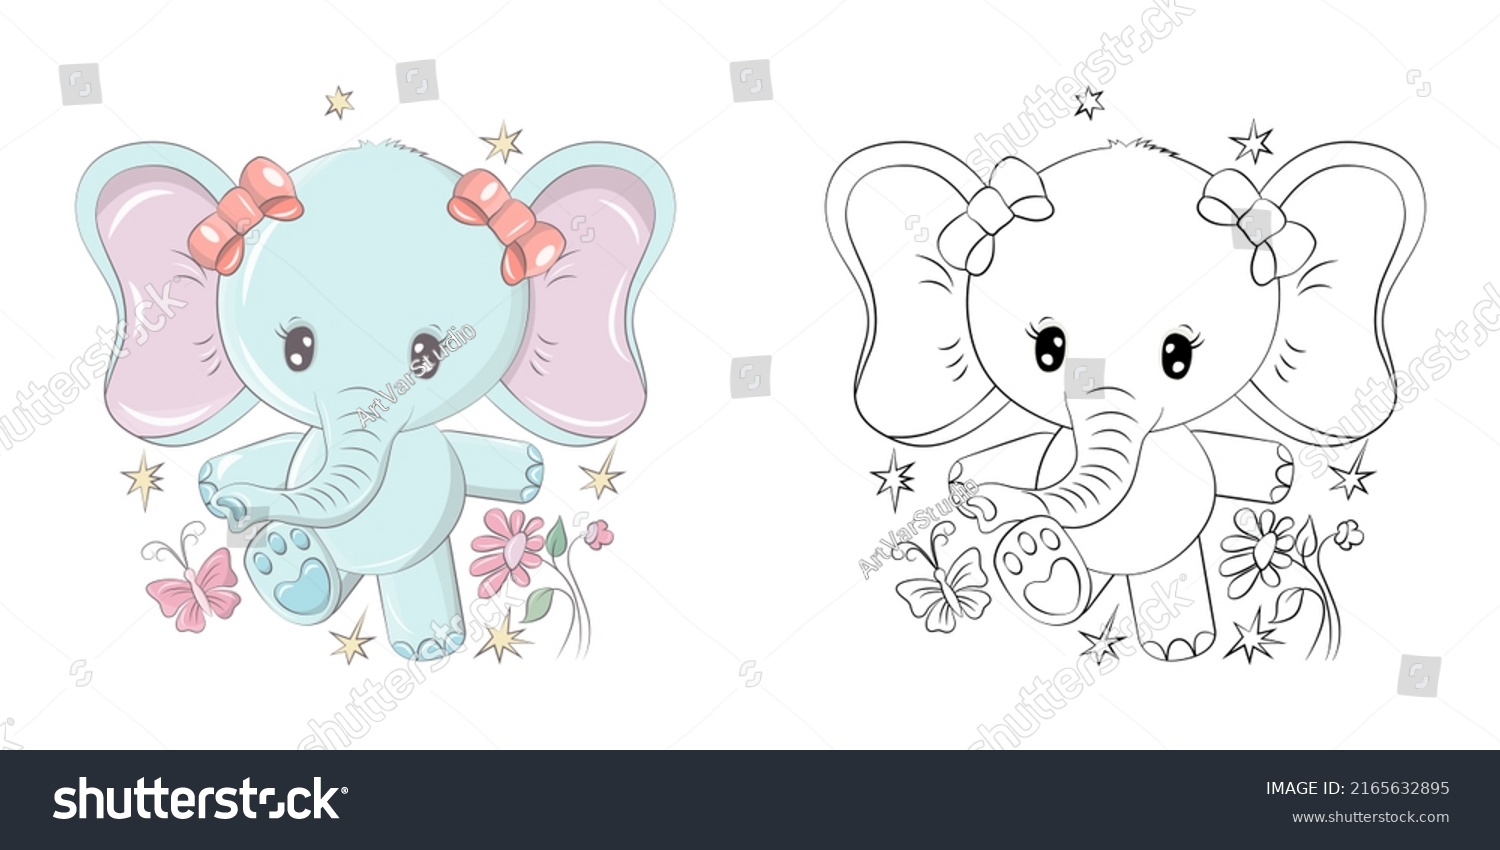 SVG of Cute Elephant Clipart for Coloring Page and Illustration. Happy Clip Art Elephant. Vector Illustration of an Animal for Stickers, Prints for Clothes, Baby Shower, Coloring Pages. svg